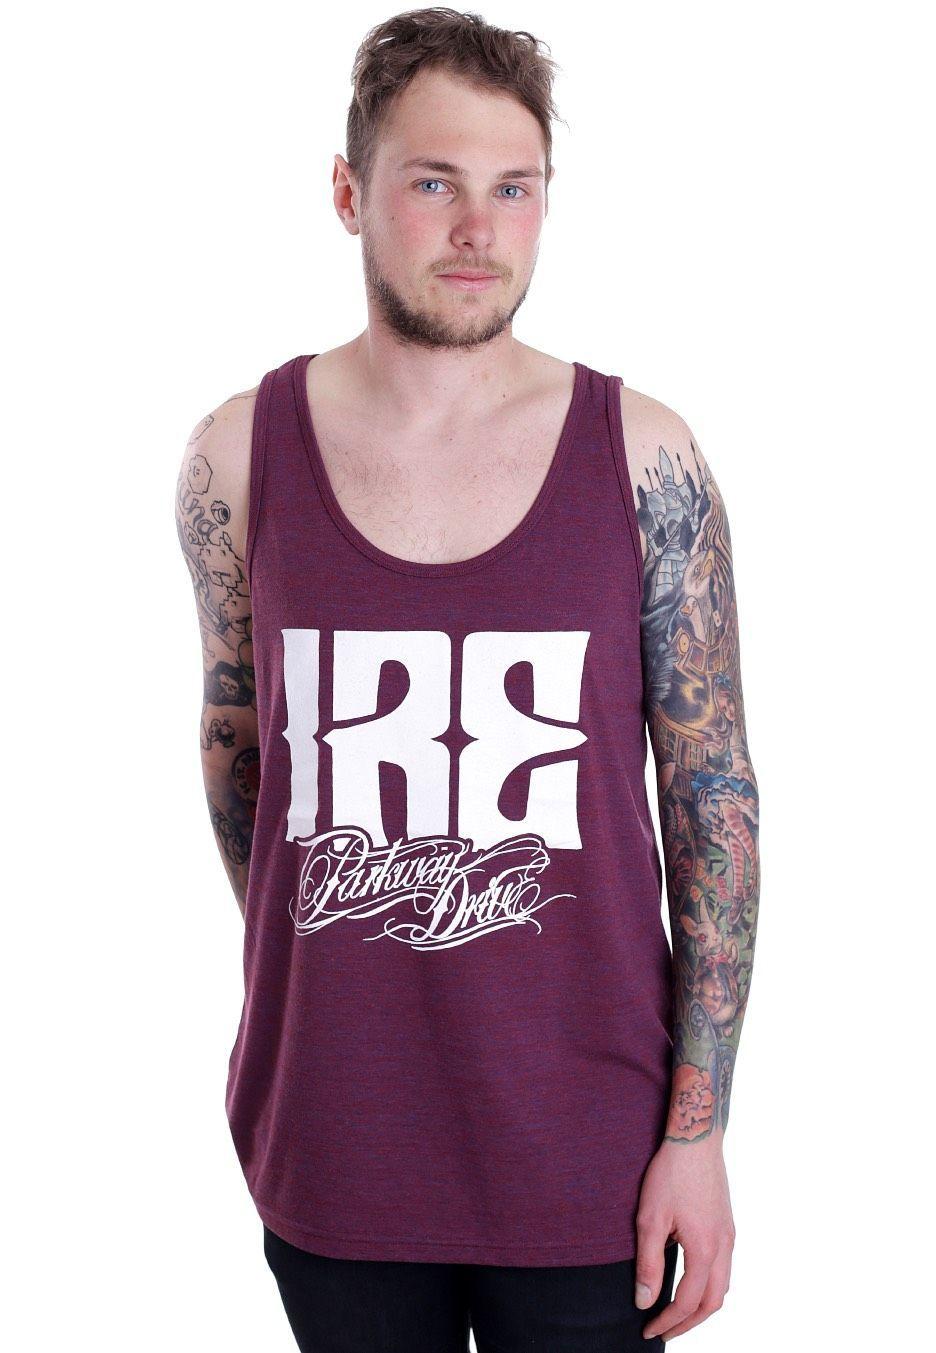 Parkway Drive Ire Logo - Parkway Drive - Ire Logo Tri Cranberry - Tank - Official Metalcore ...